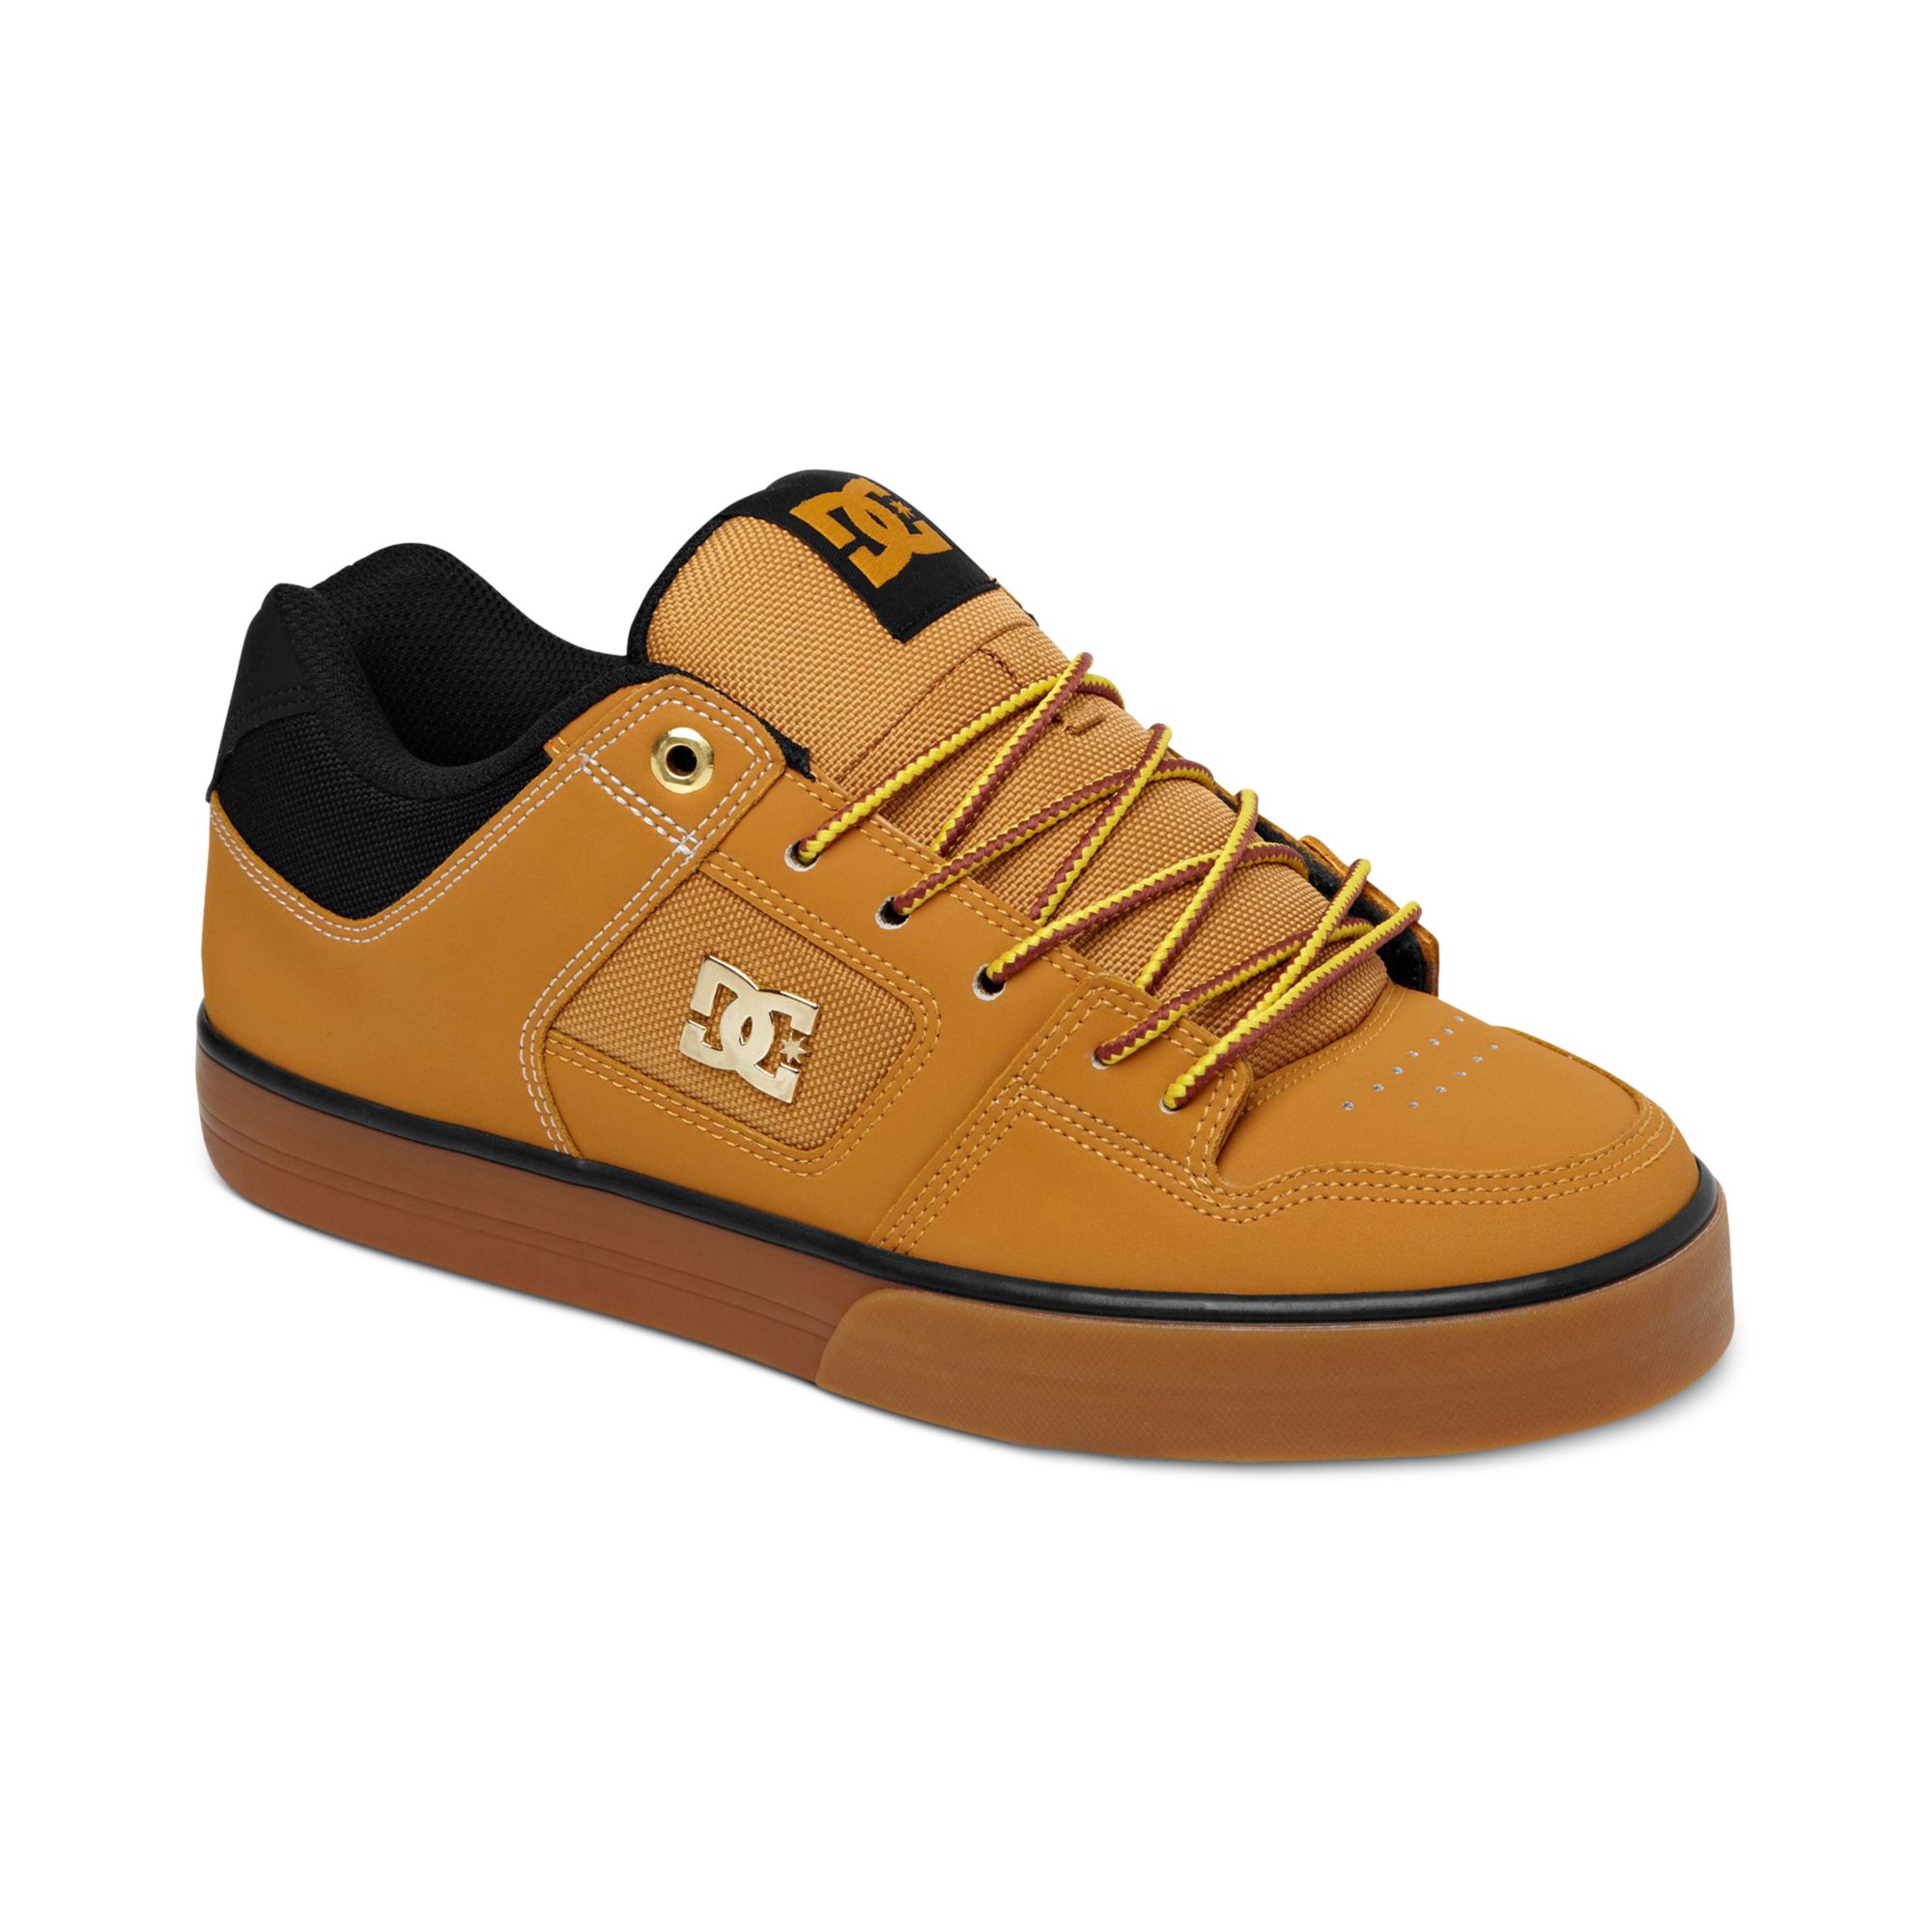 dc shoes brown